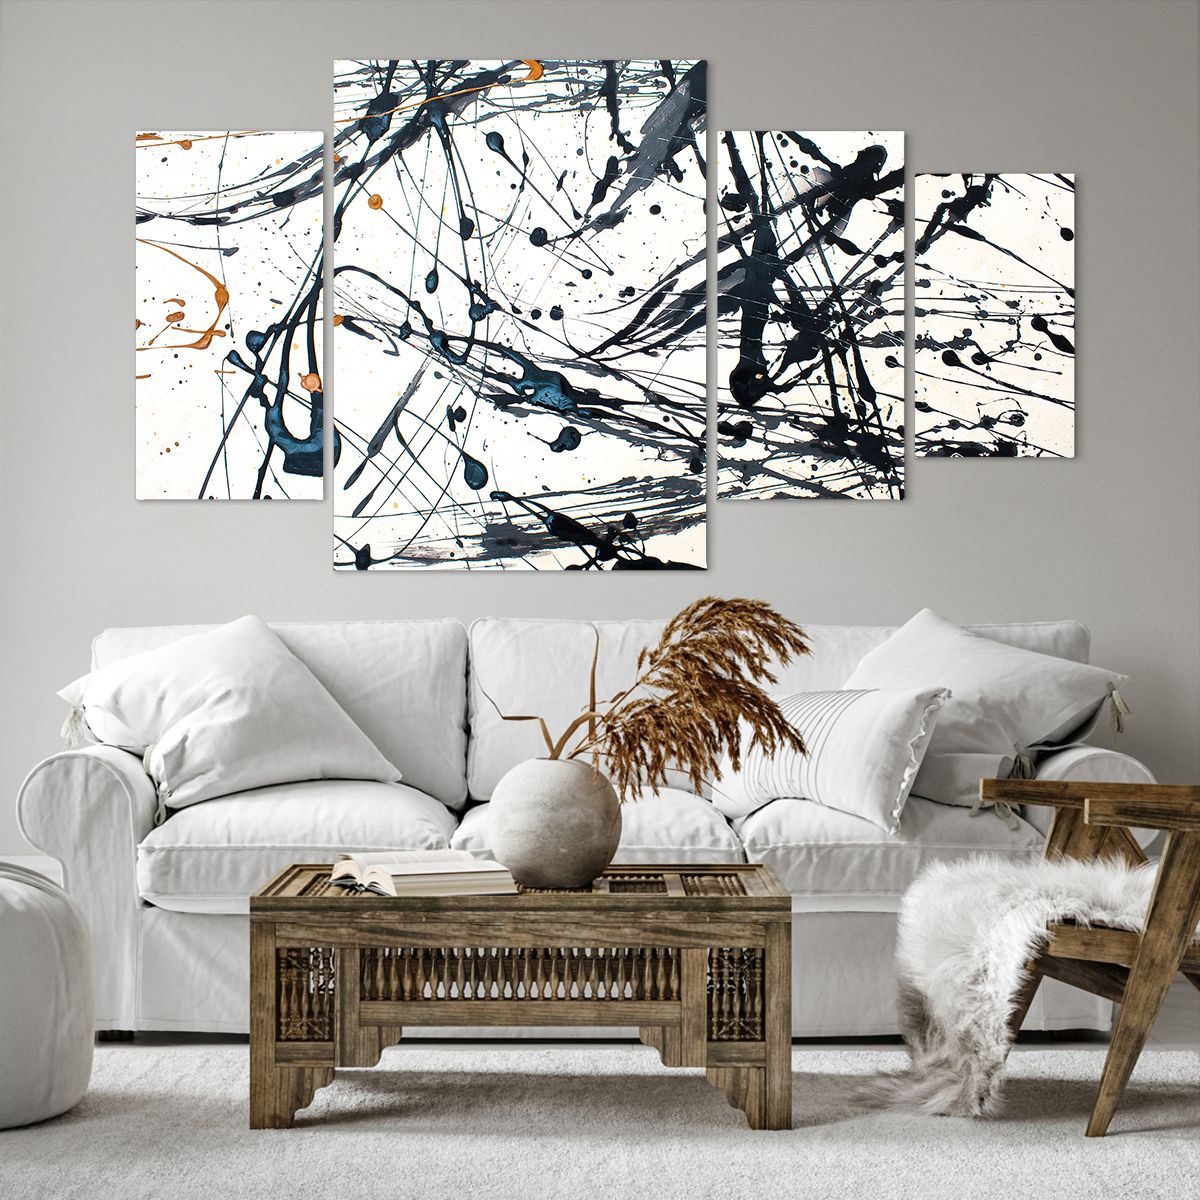 Impression sur toile Abstraction, Impression sur toile Graphique, Impression sur toile Art, Impression sur toile Peindre, Impression sur toile Art Moderne